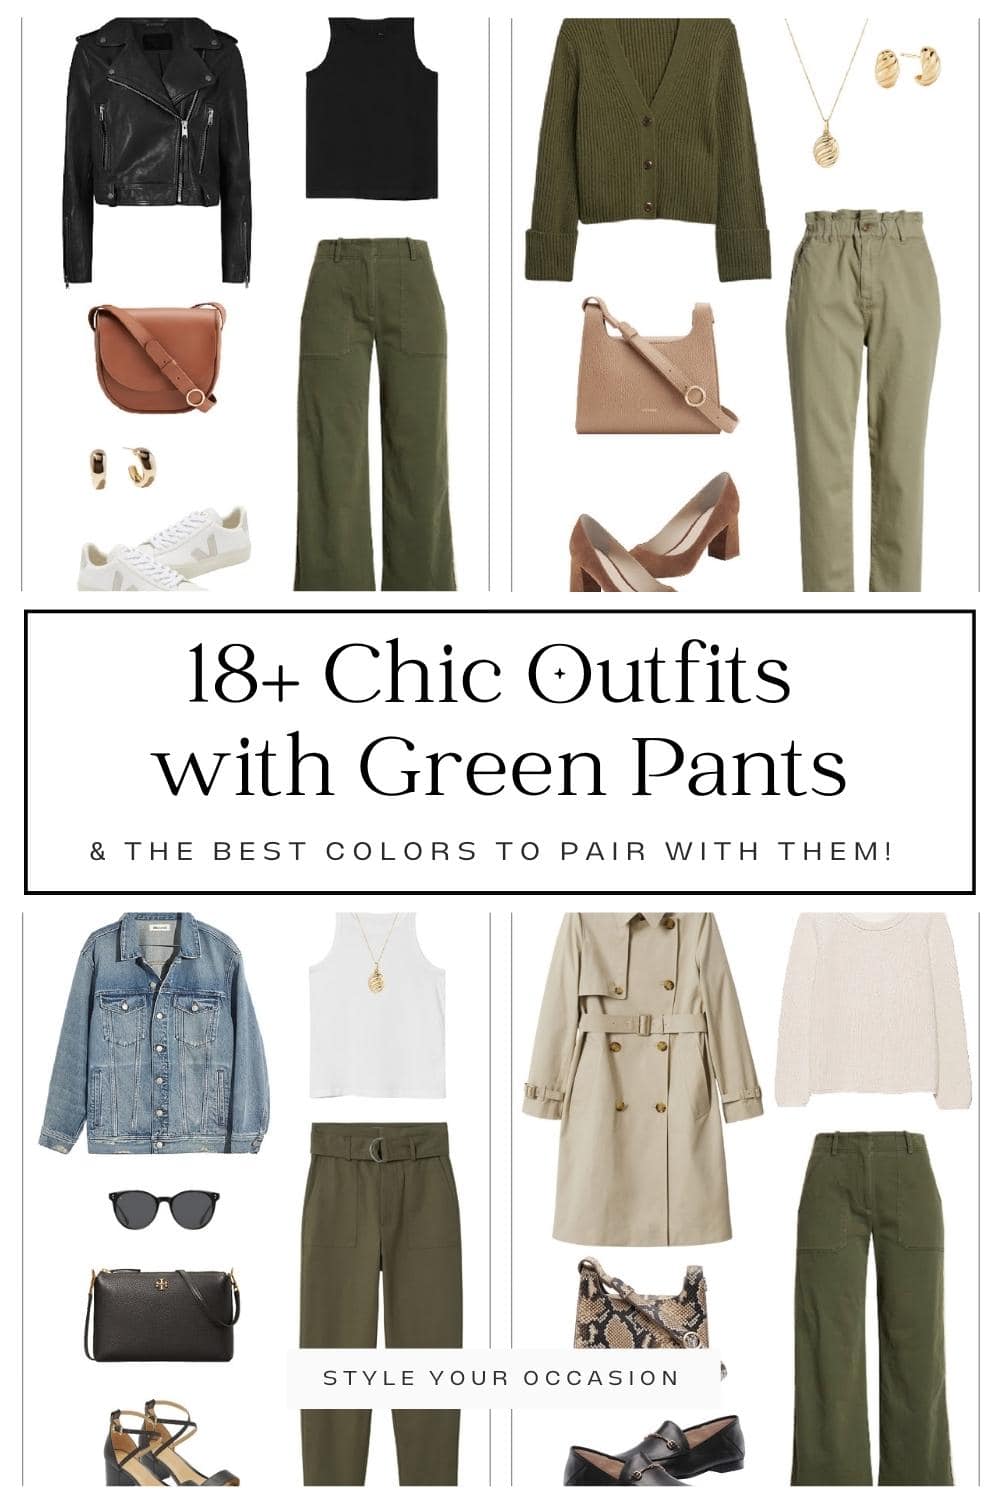 19+ Womens Green Pants Outfits (& Best Colors To Wear With!)